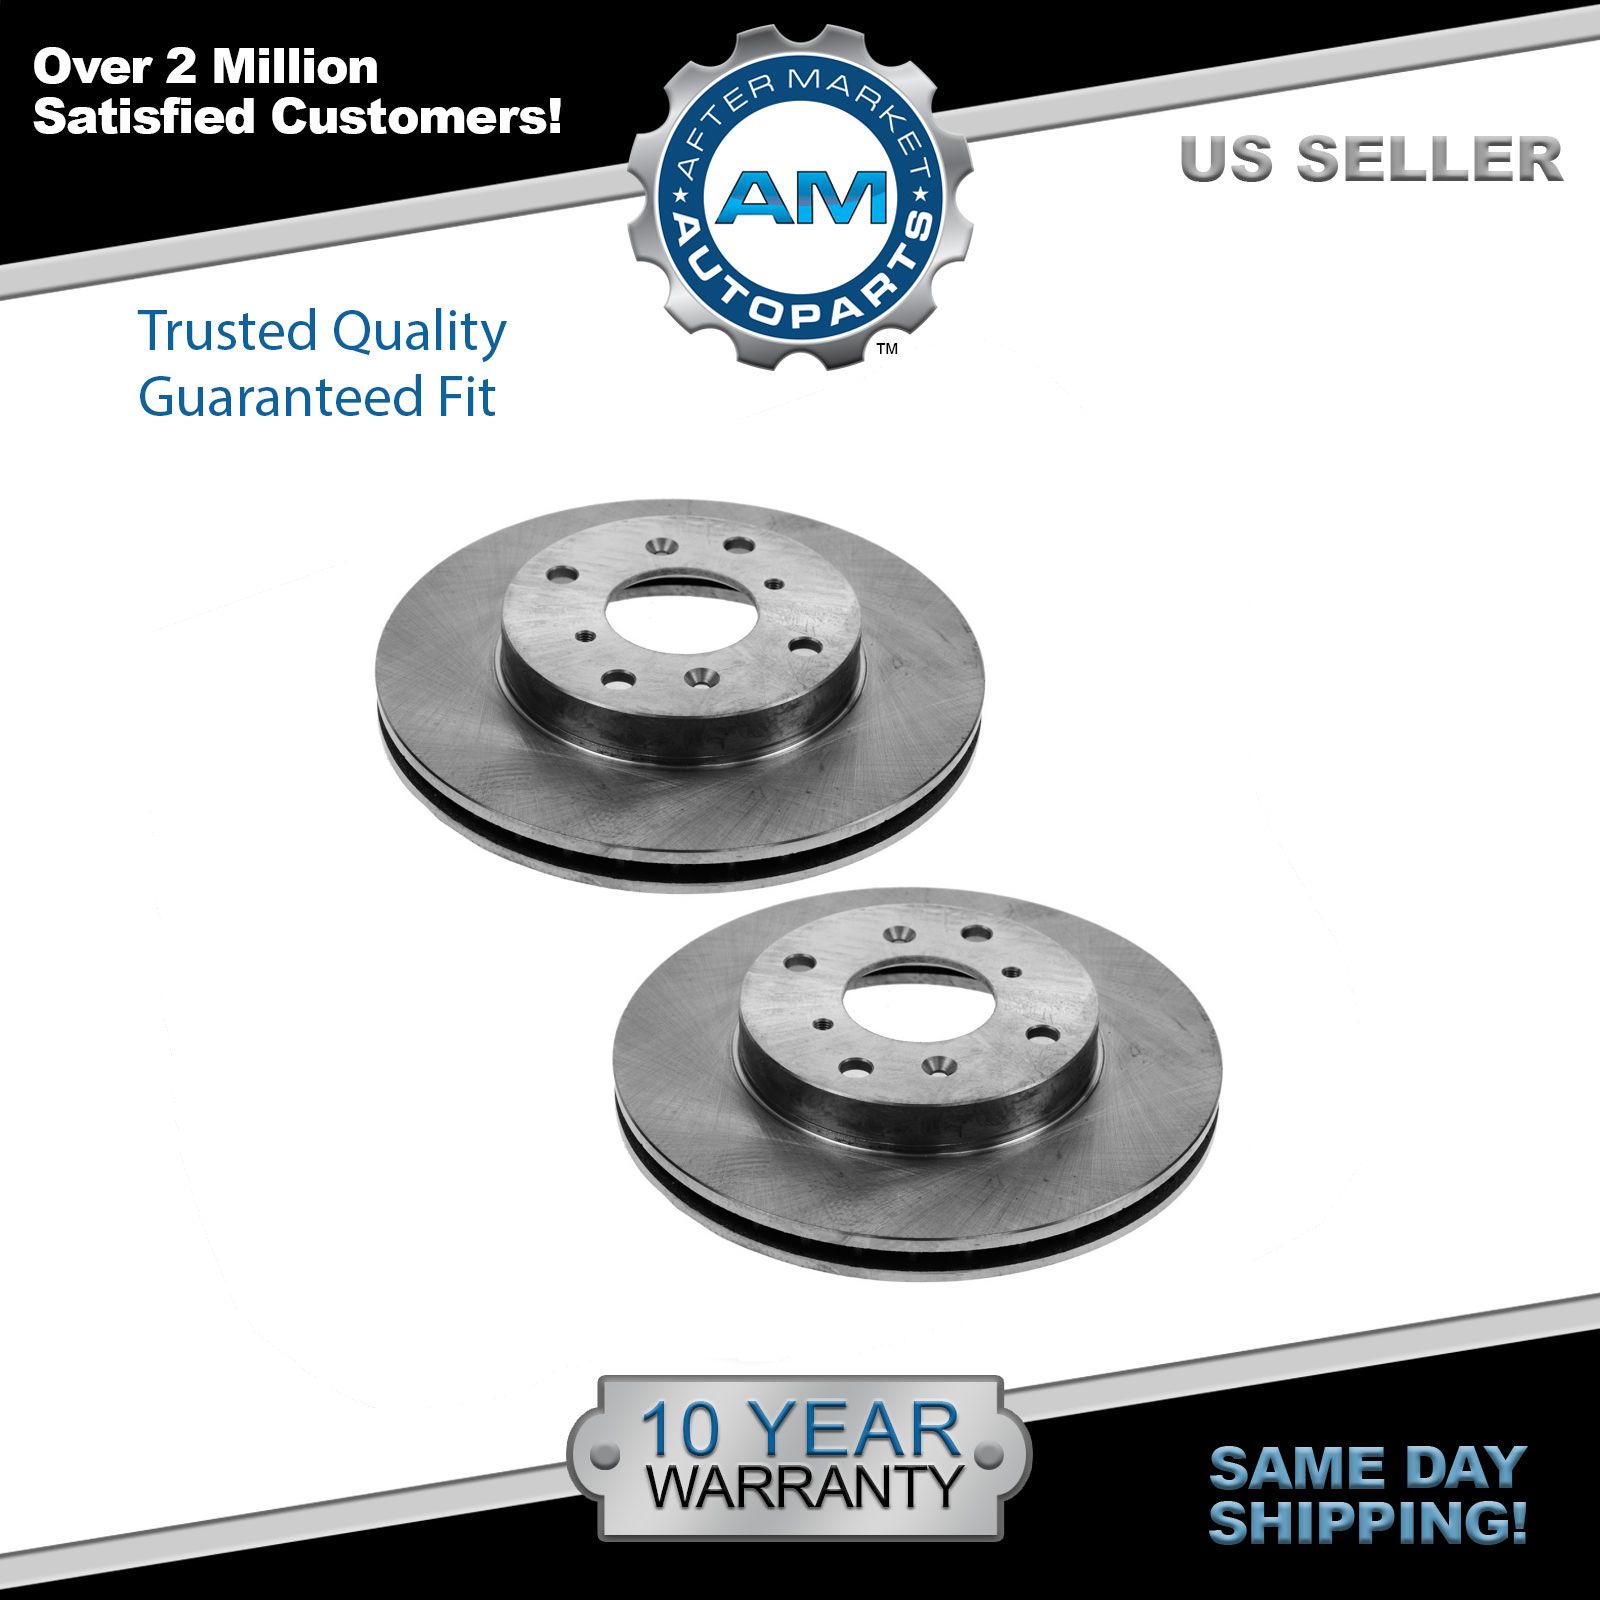 OE Replacement 1998 1999 2000 Honda Accord Sdn 4Cyl Rotors Ceramic Pads F+R